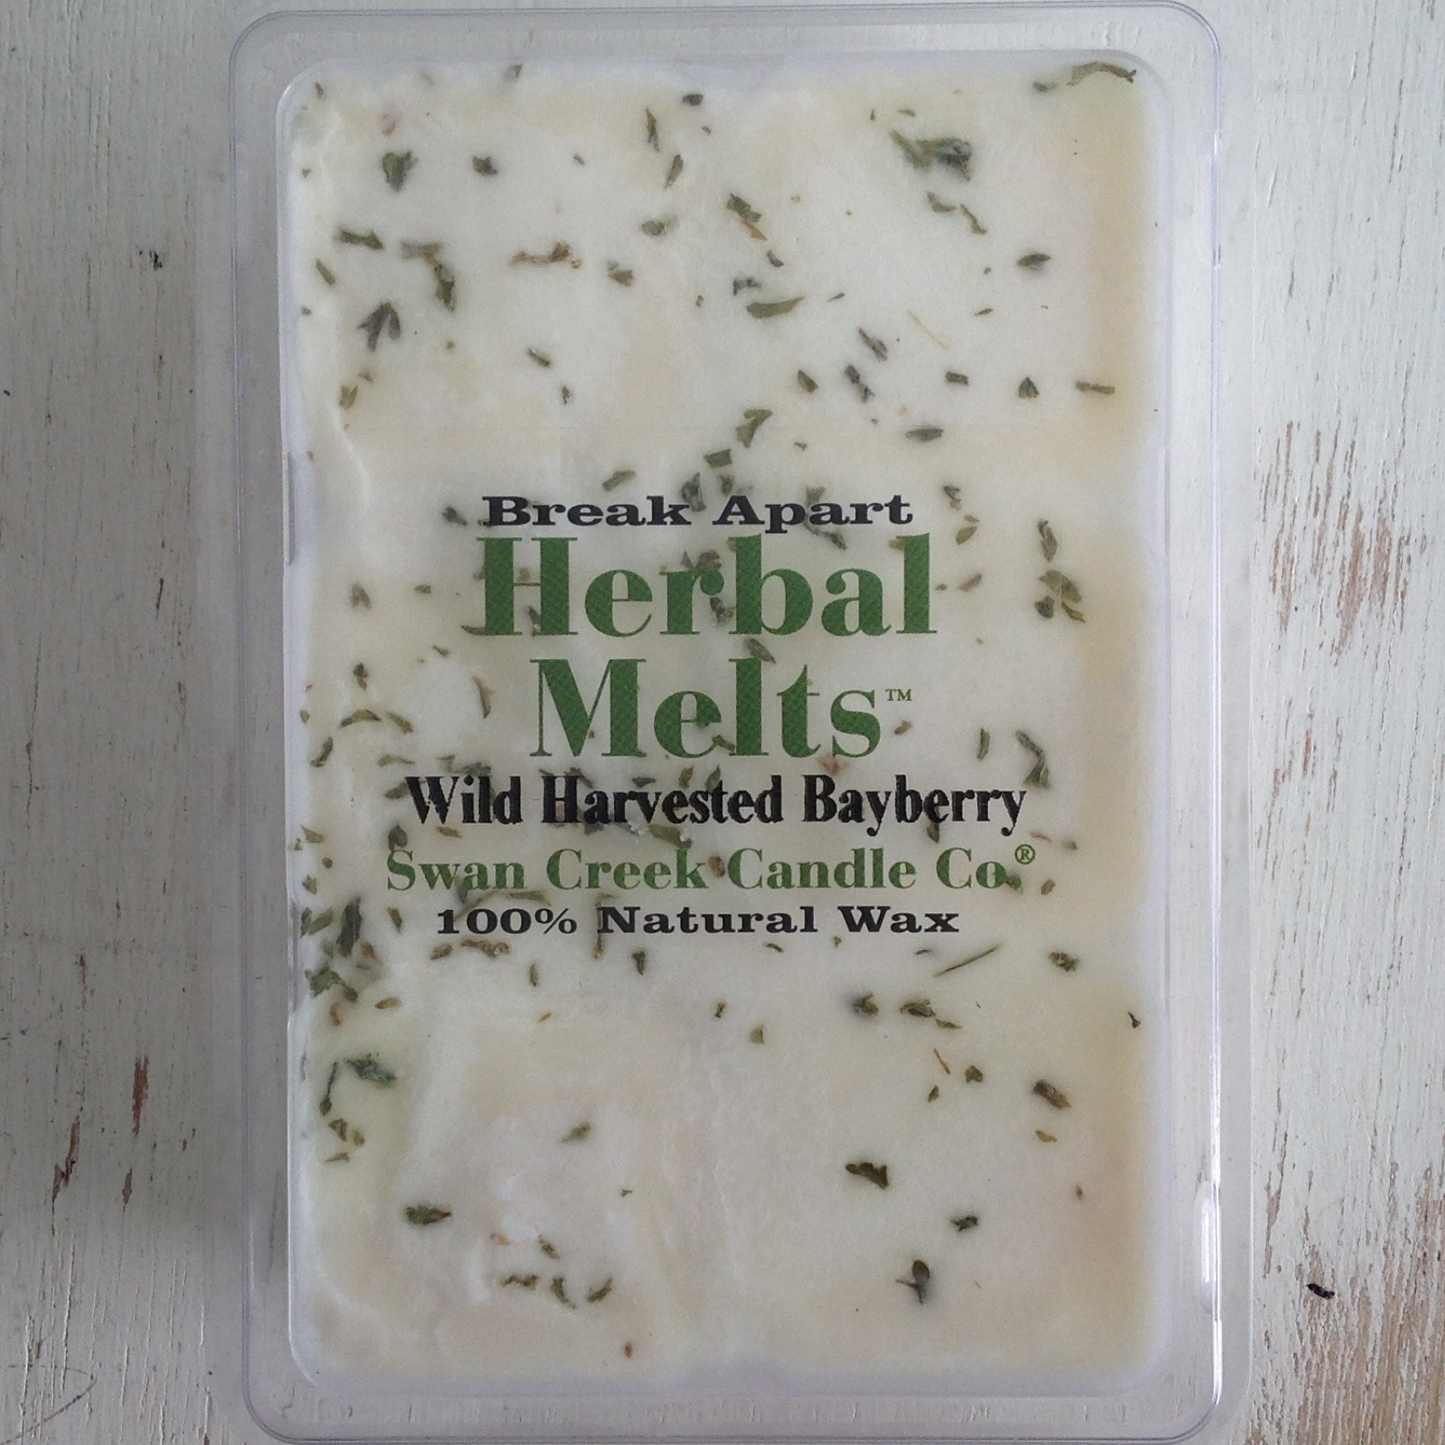 Wild Harvested Bayberry Herbal Melts